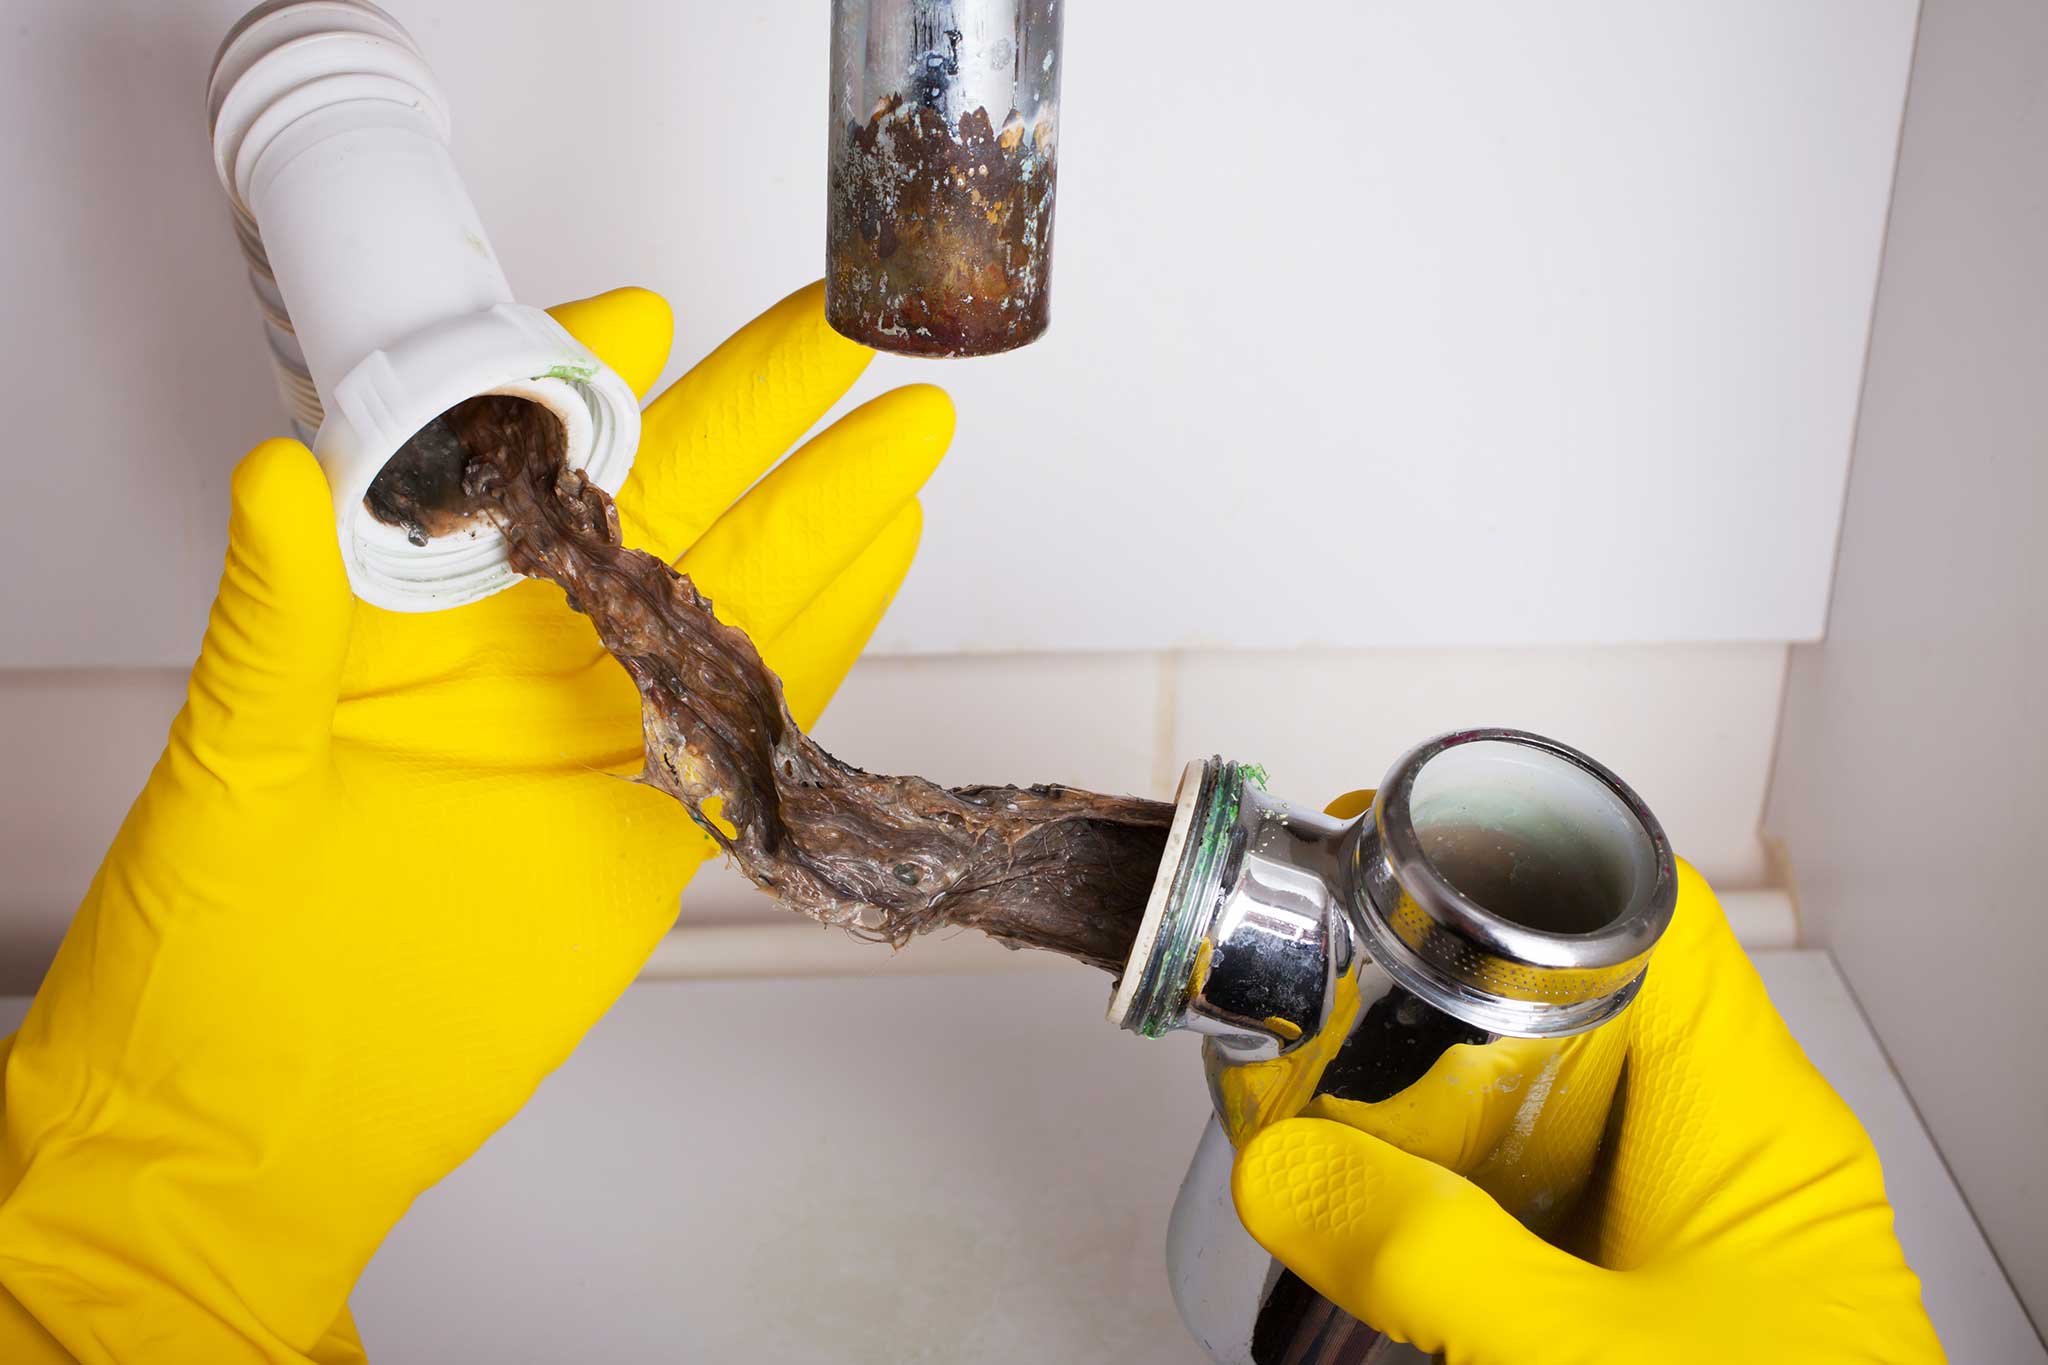 Yellow-gloved hands pull apart plumbing showing clump of wet hair